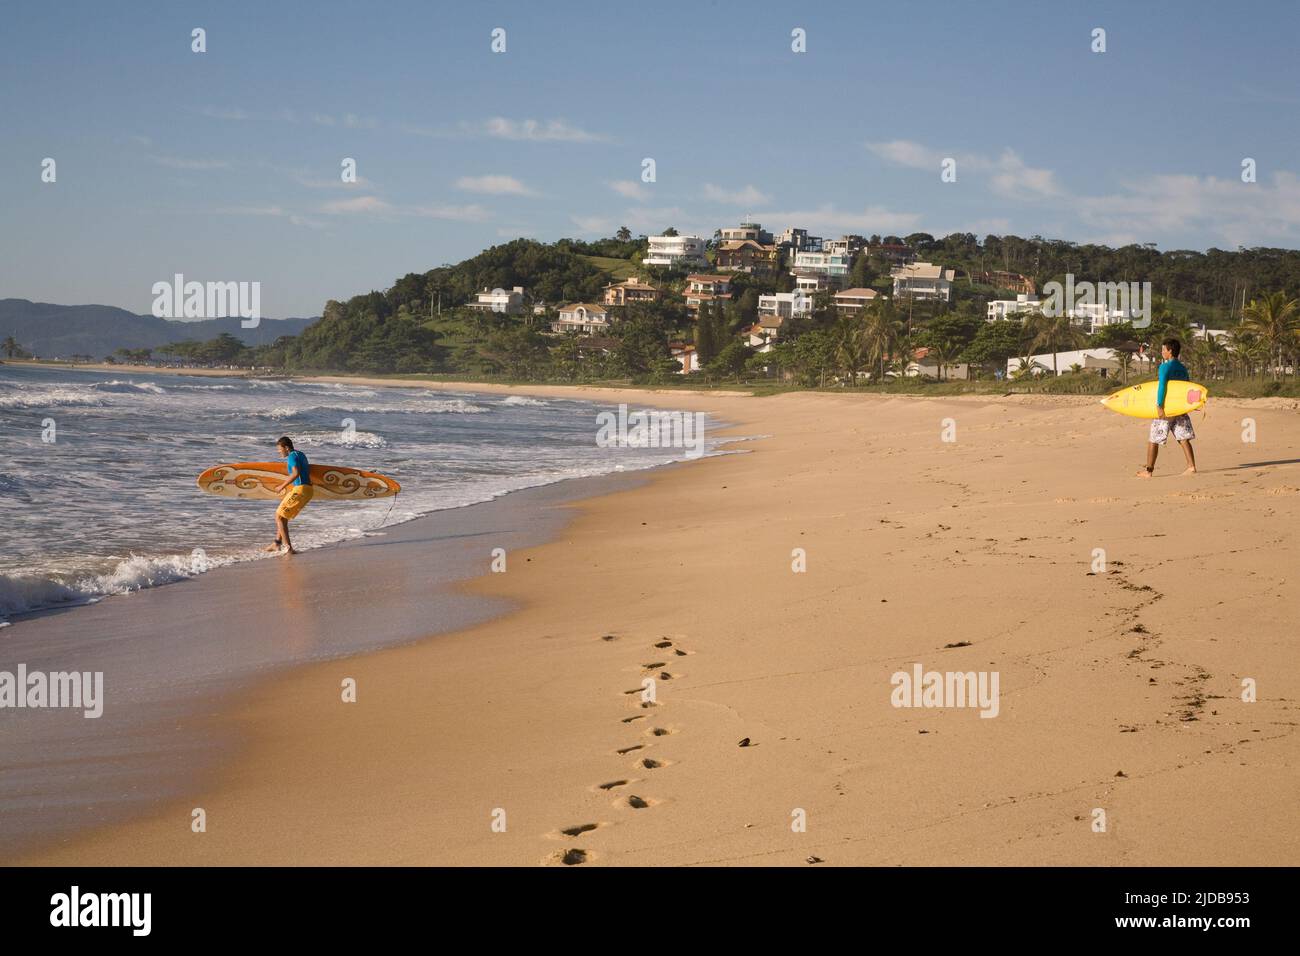 The beach at Itapema Plaza Resort and Spa, Santa Catarina, Brazil. Condos and private mansions are part of the resort community which includes an on-s Stock Photo